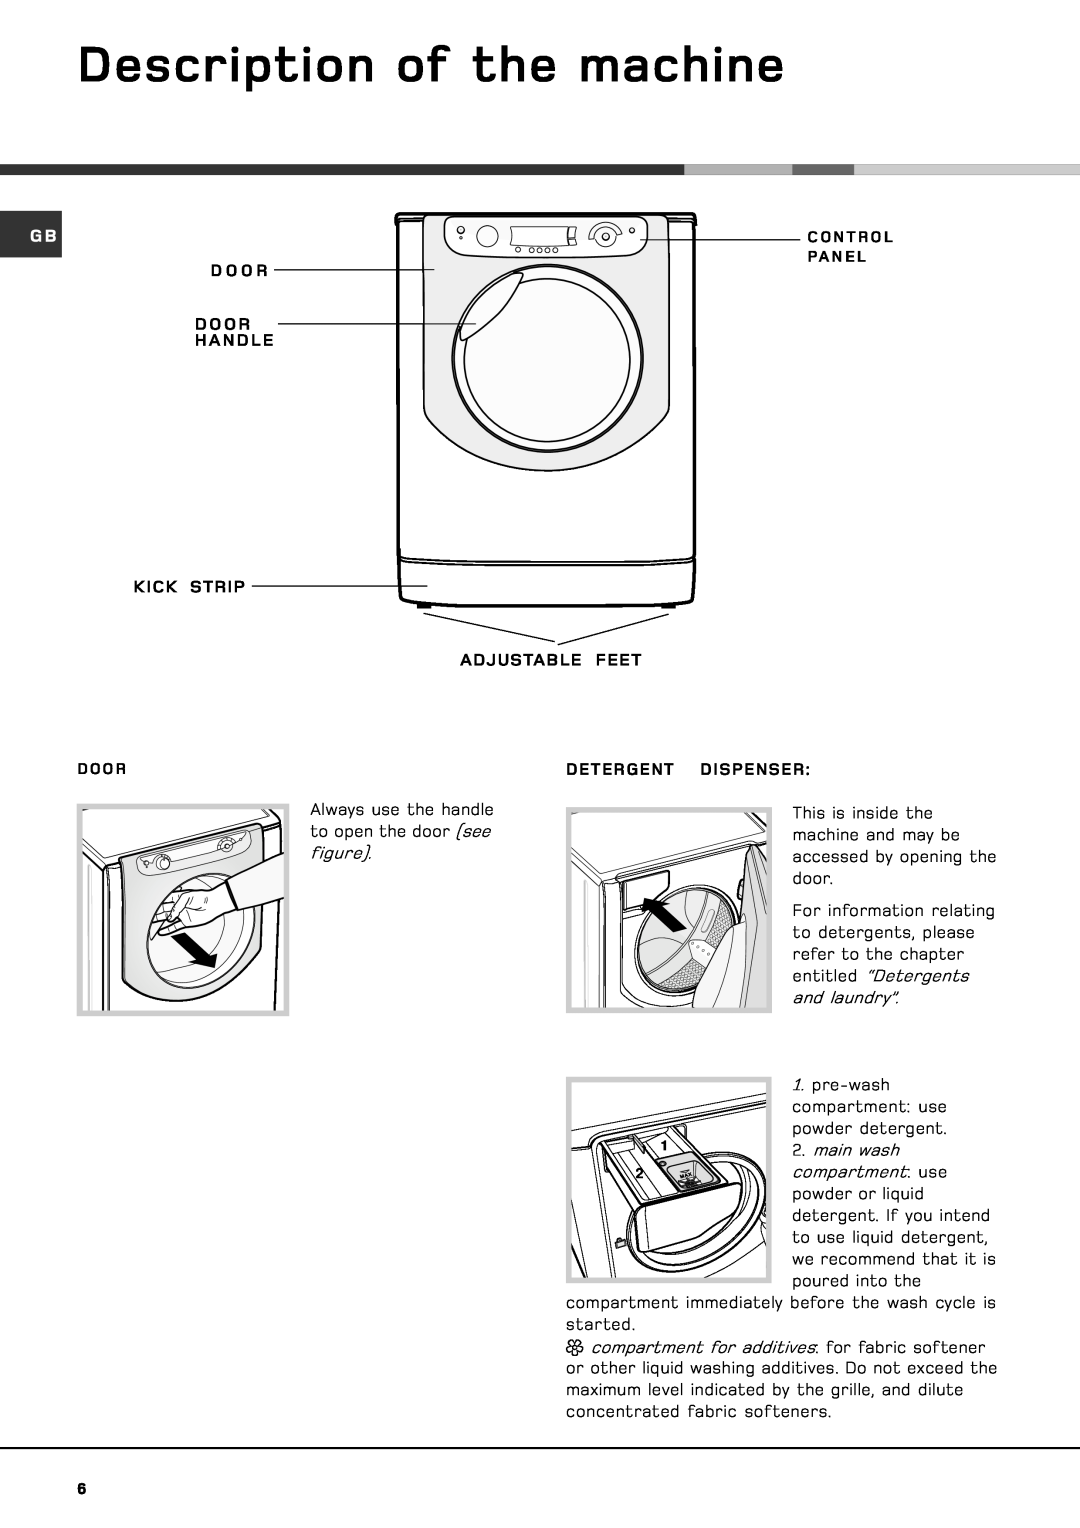 Hotpoint AQXXD 169 manual Description of the machine, Pa N E L, Door 